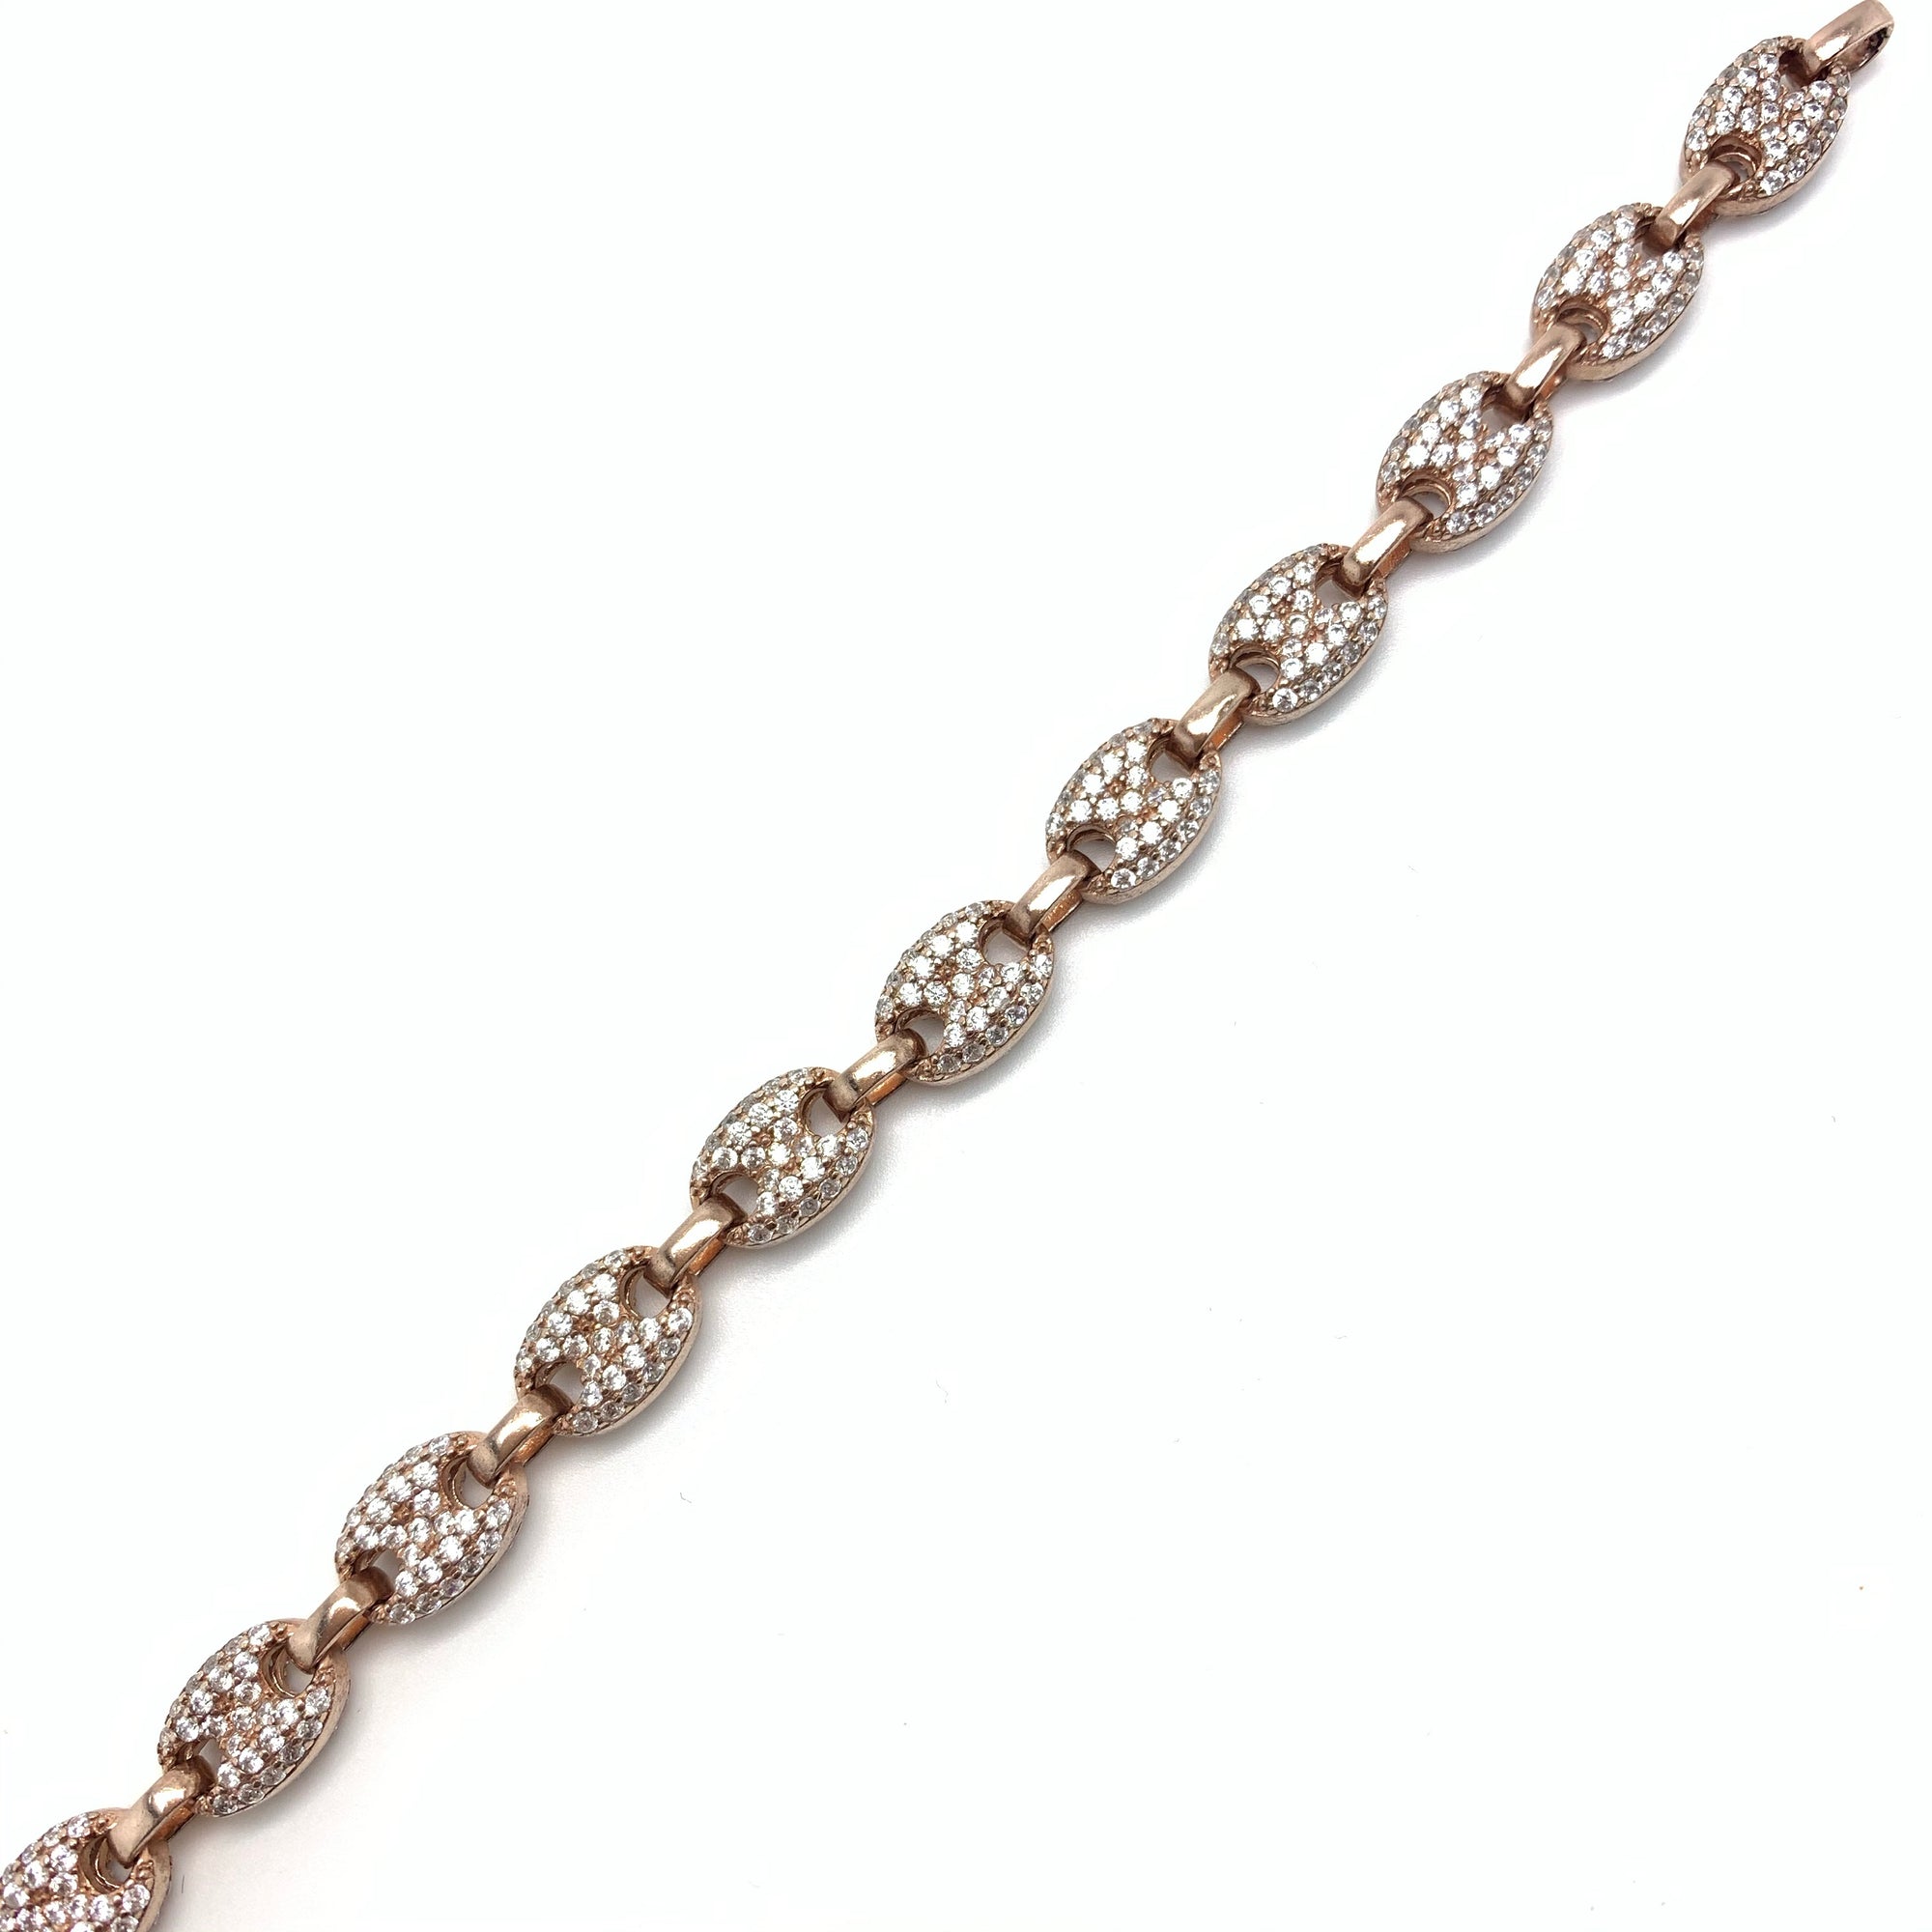 Iced Rose Gold Gucci Link Chain (Long 36”inches)